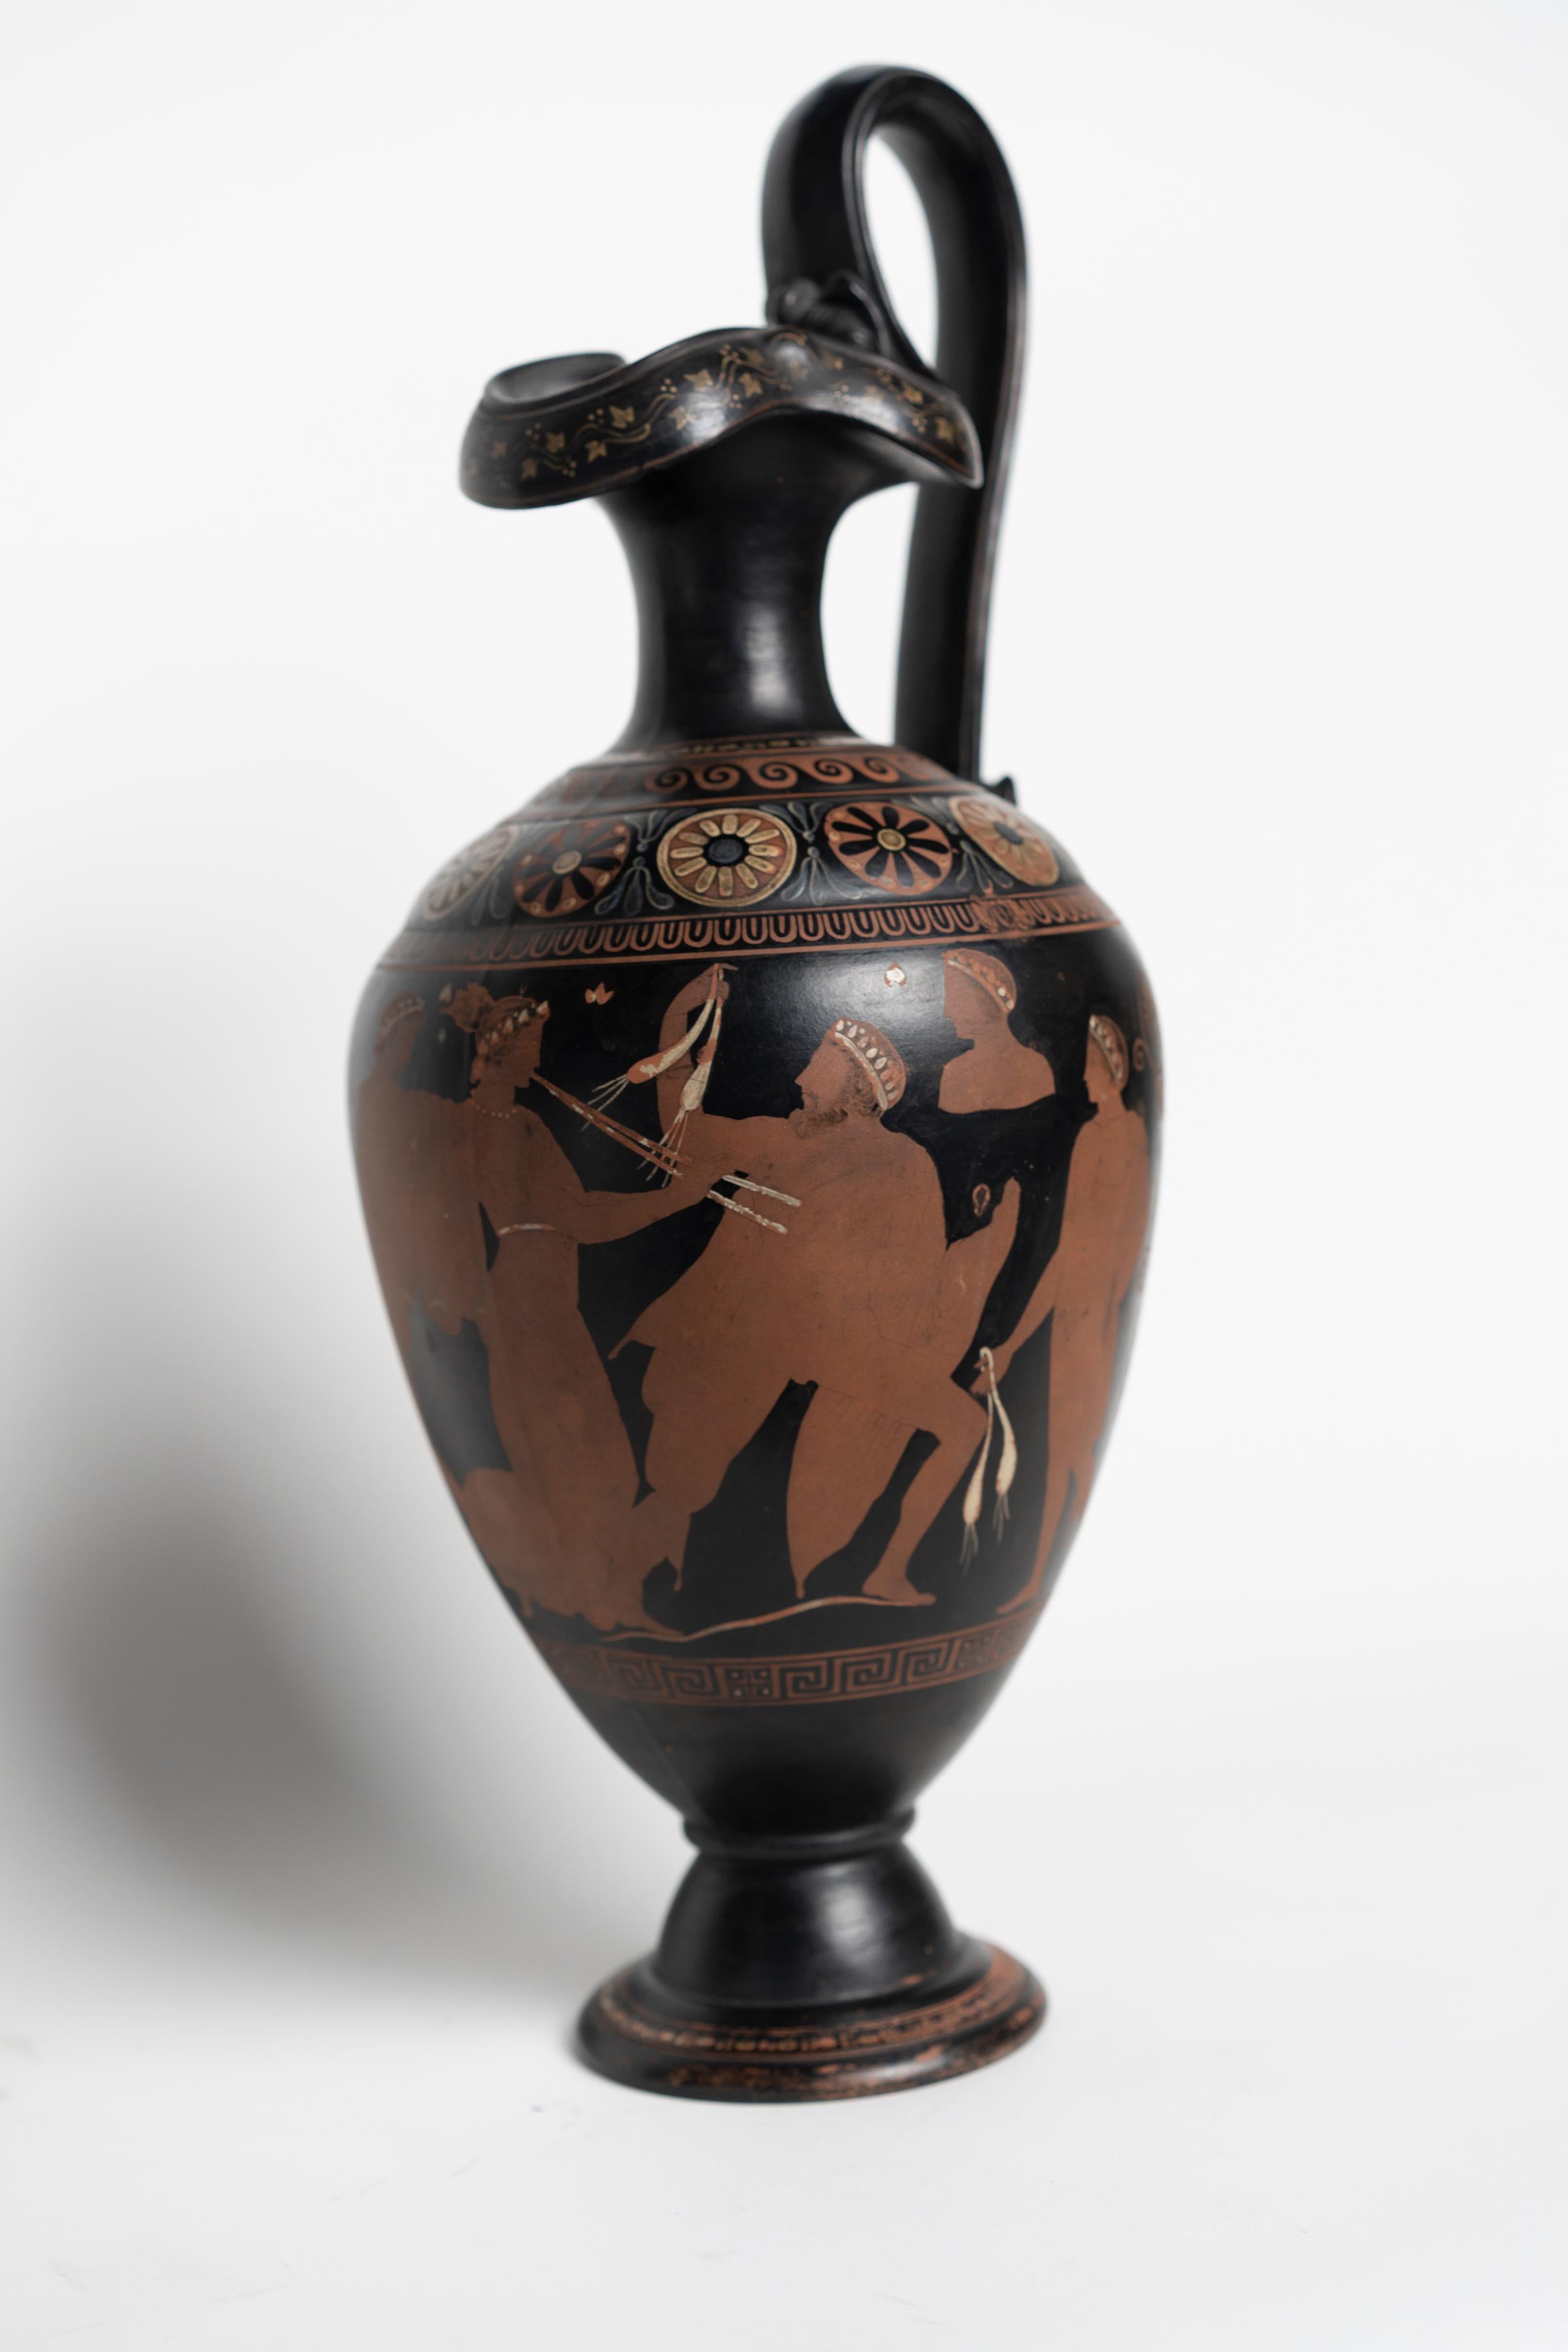 Grand Tour Etruscan terracotta ewer depicting neoclassical figures.